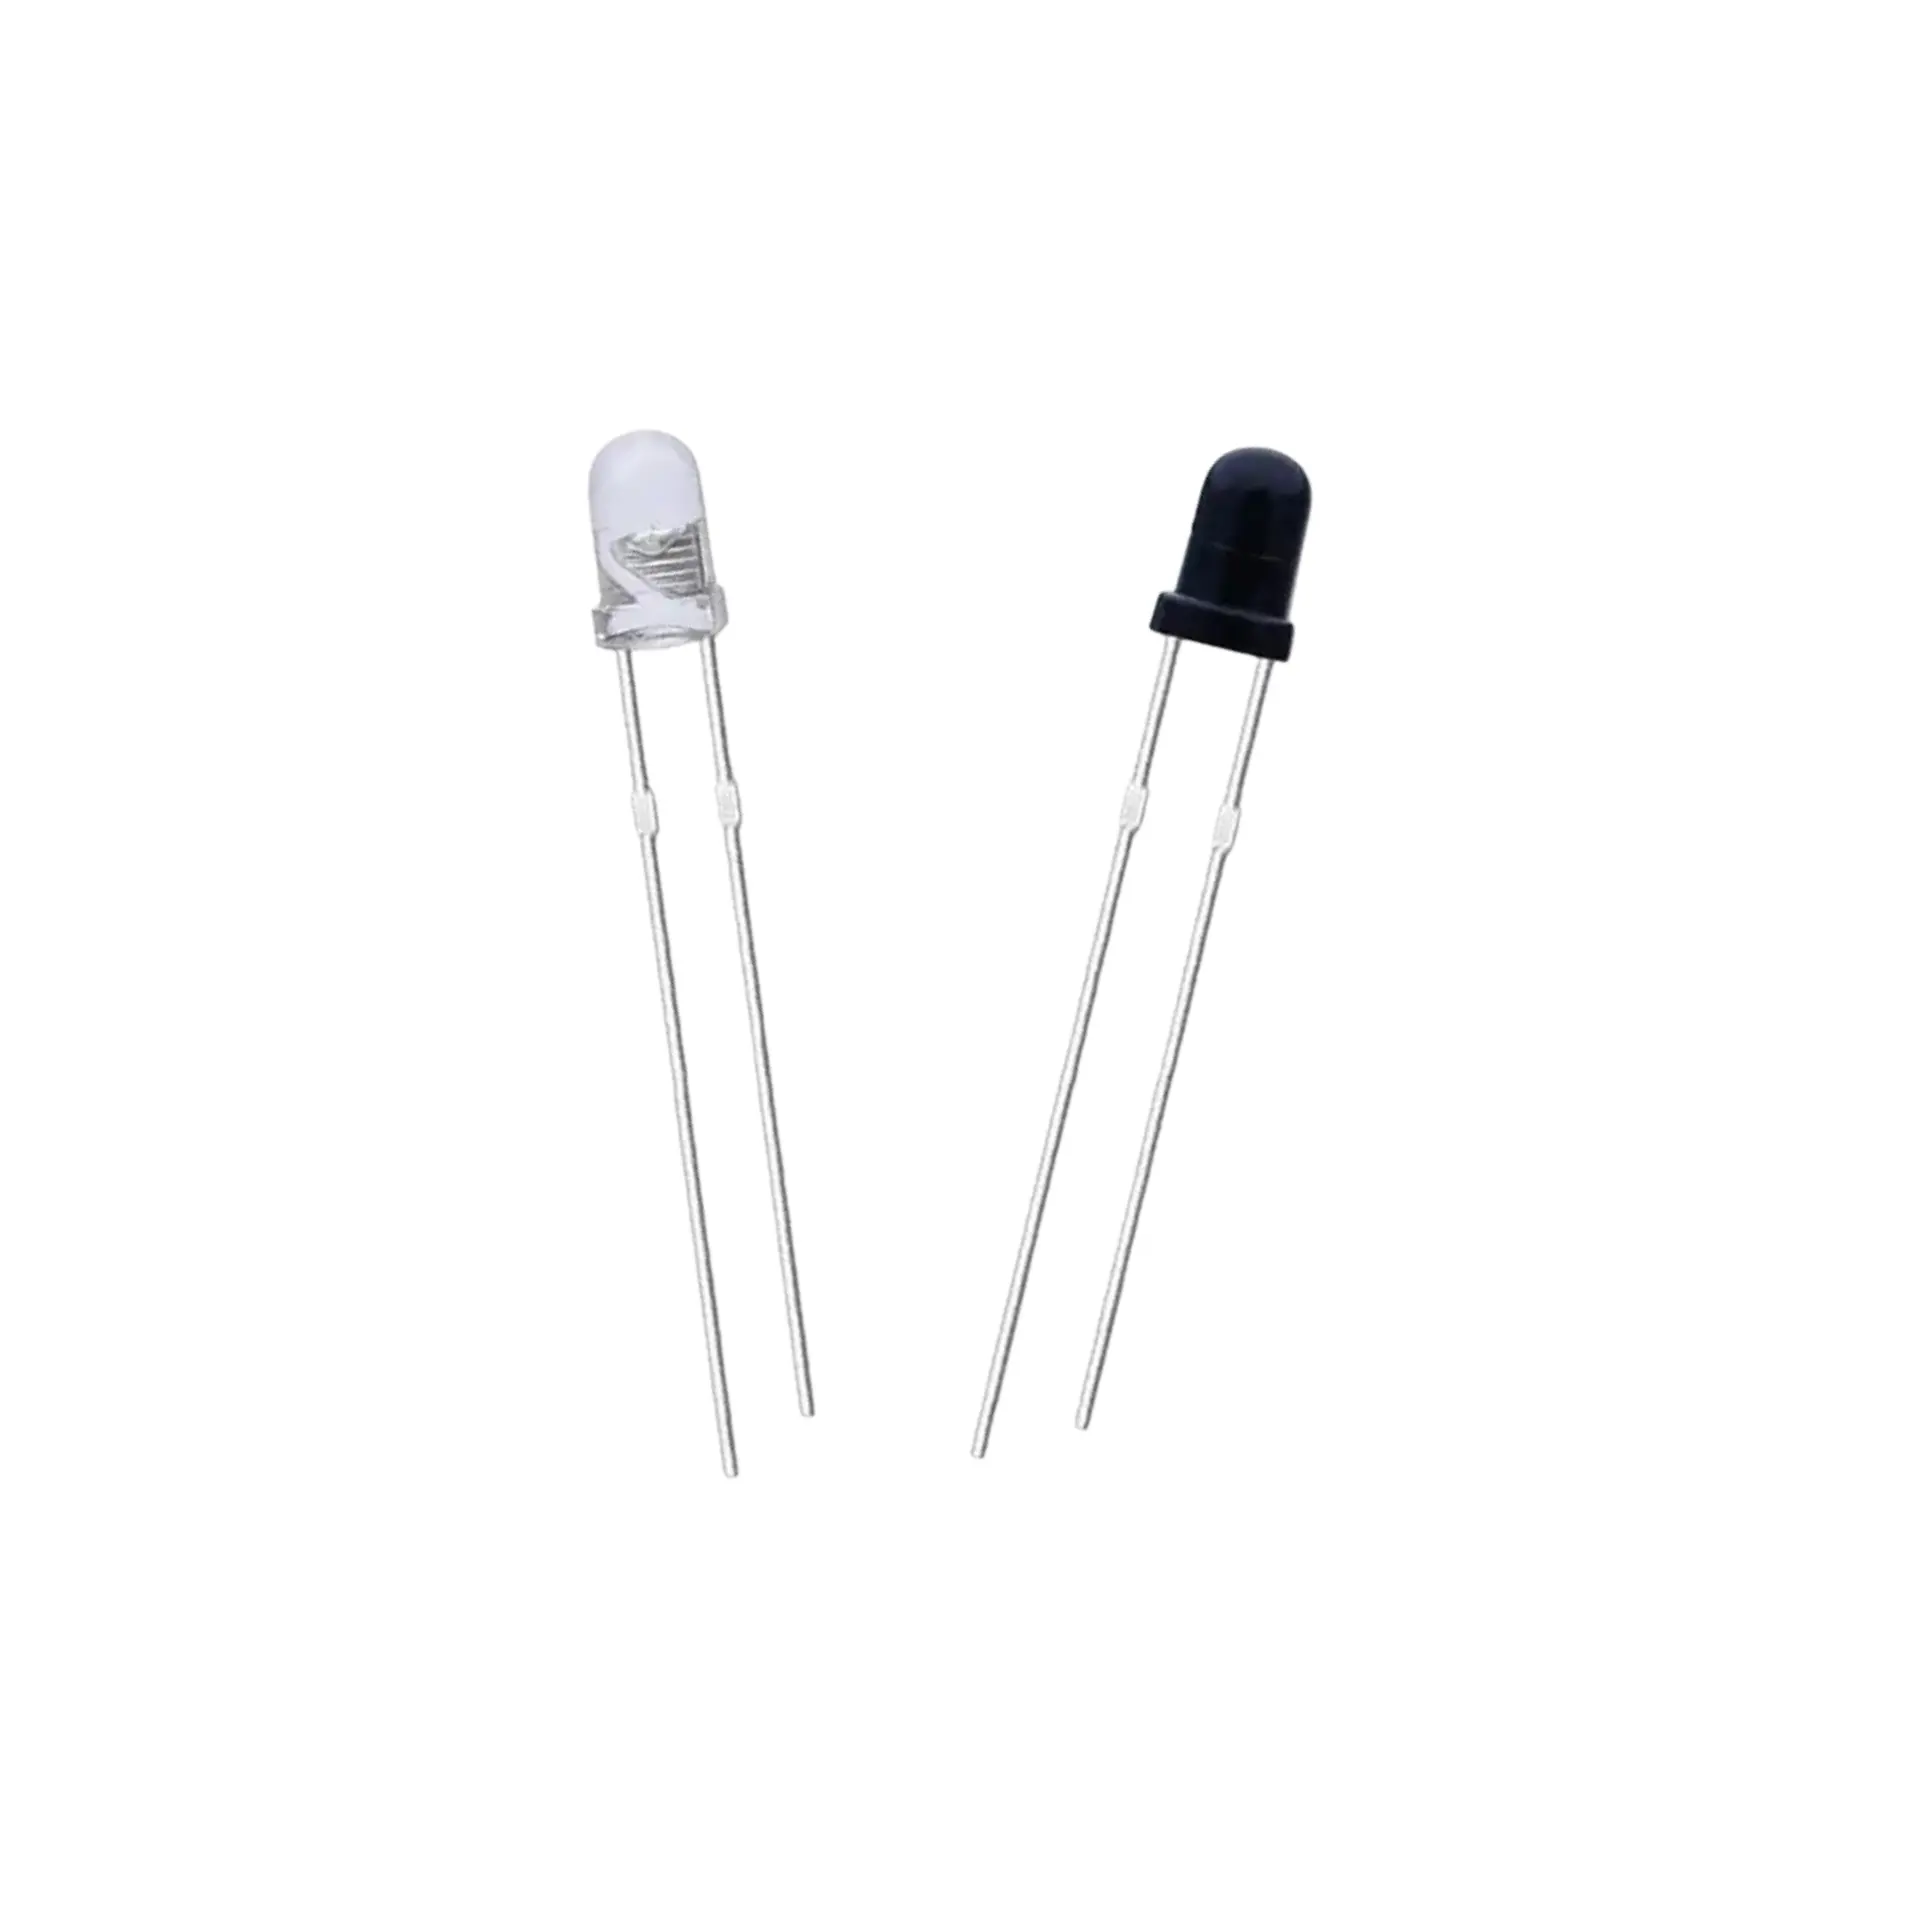 JOMHYM 3mm 5mm IR Infrared Emitter LED Diode Infrared Receiver For Remote Control IR Application